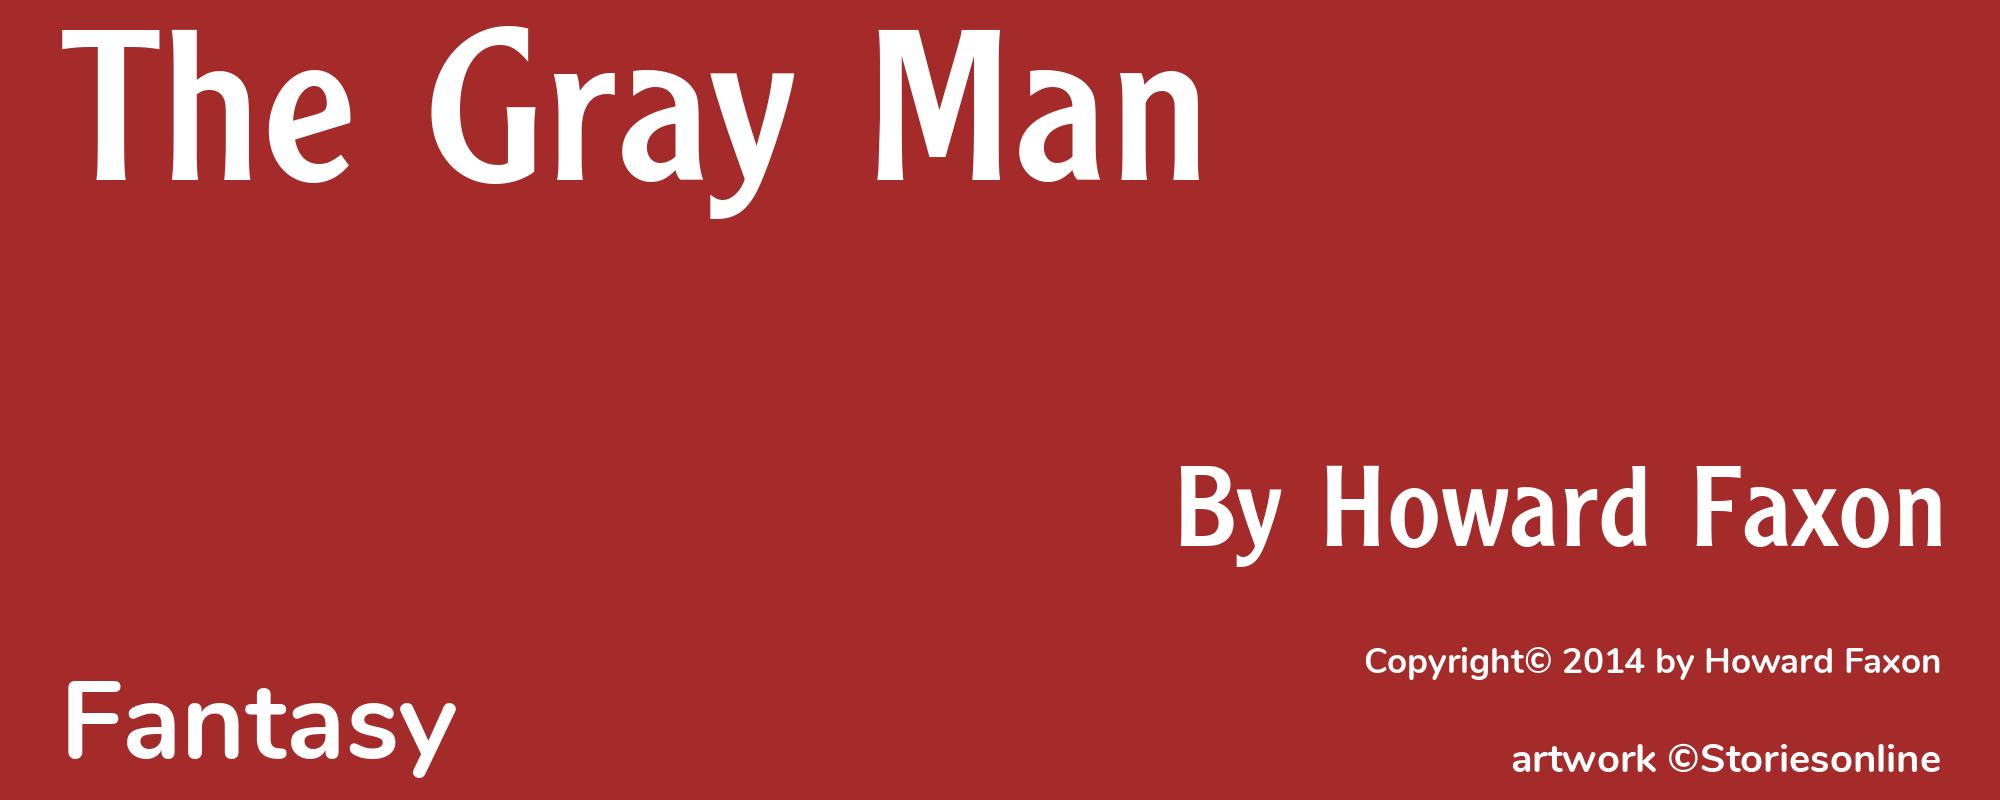 The Gray Man - Cover